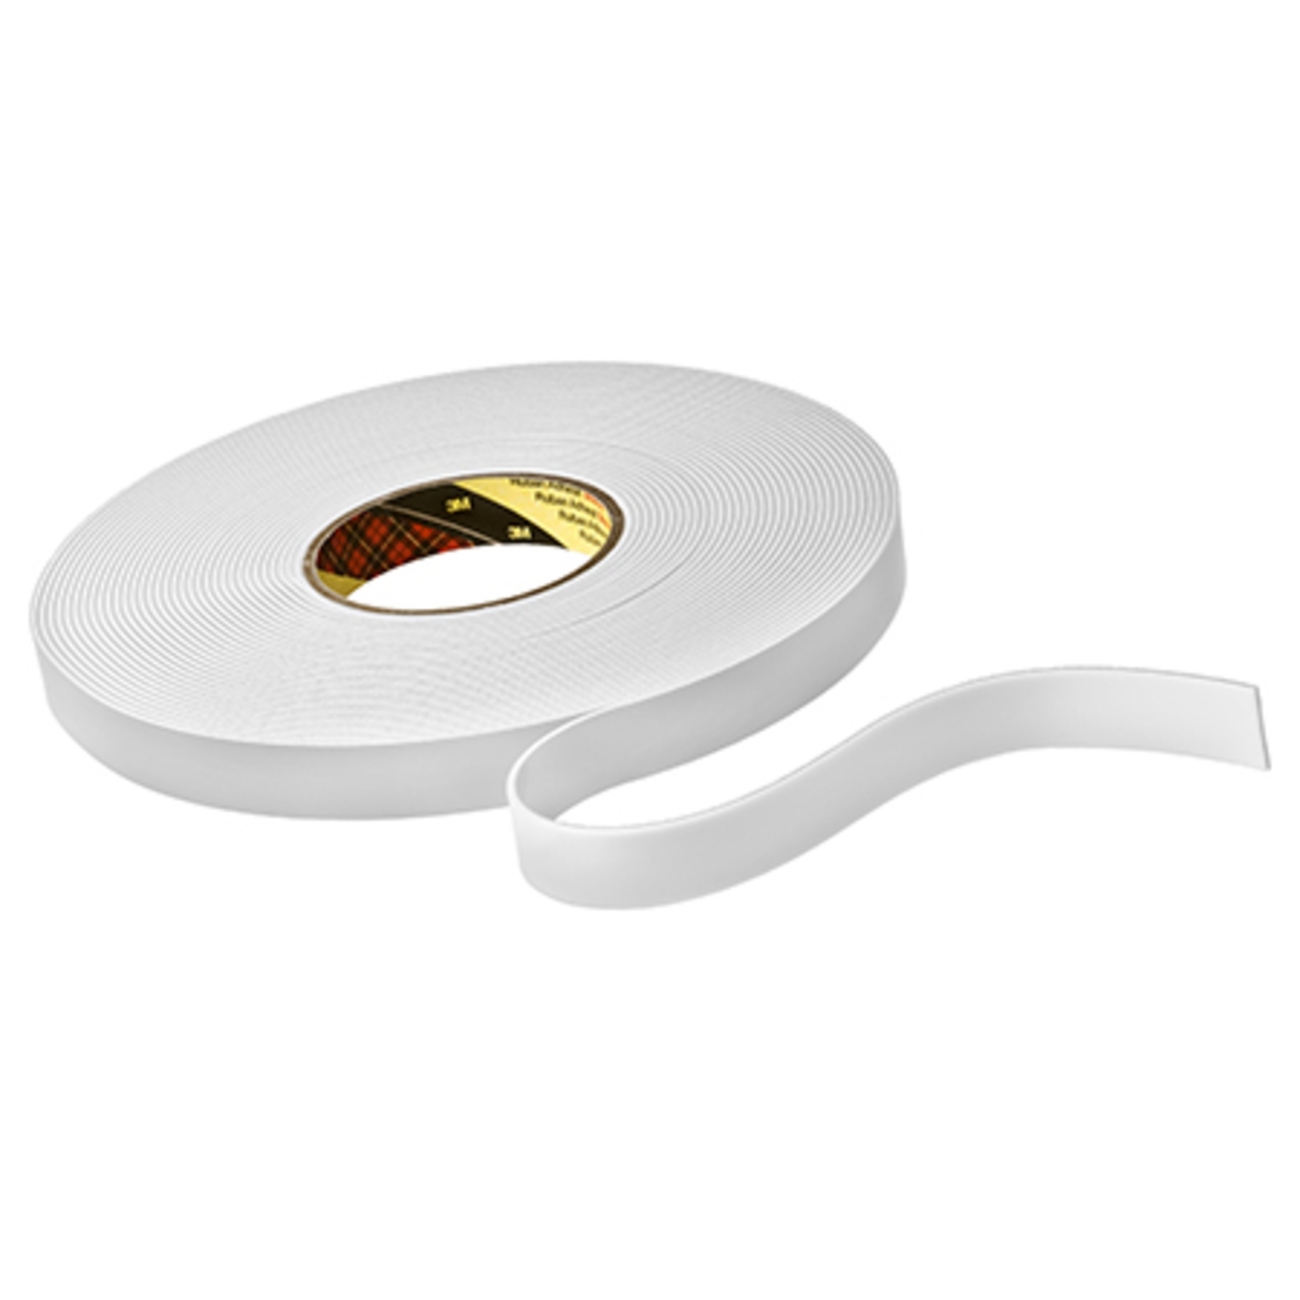 3M Double-sided PE foam tape with acrylic adhesive 9515W, white, 6 mm x 33 m, 1.5 mm